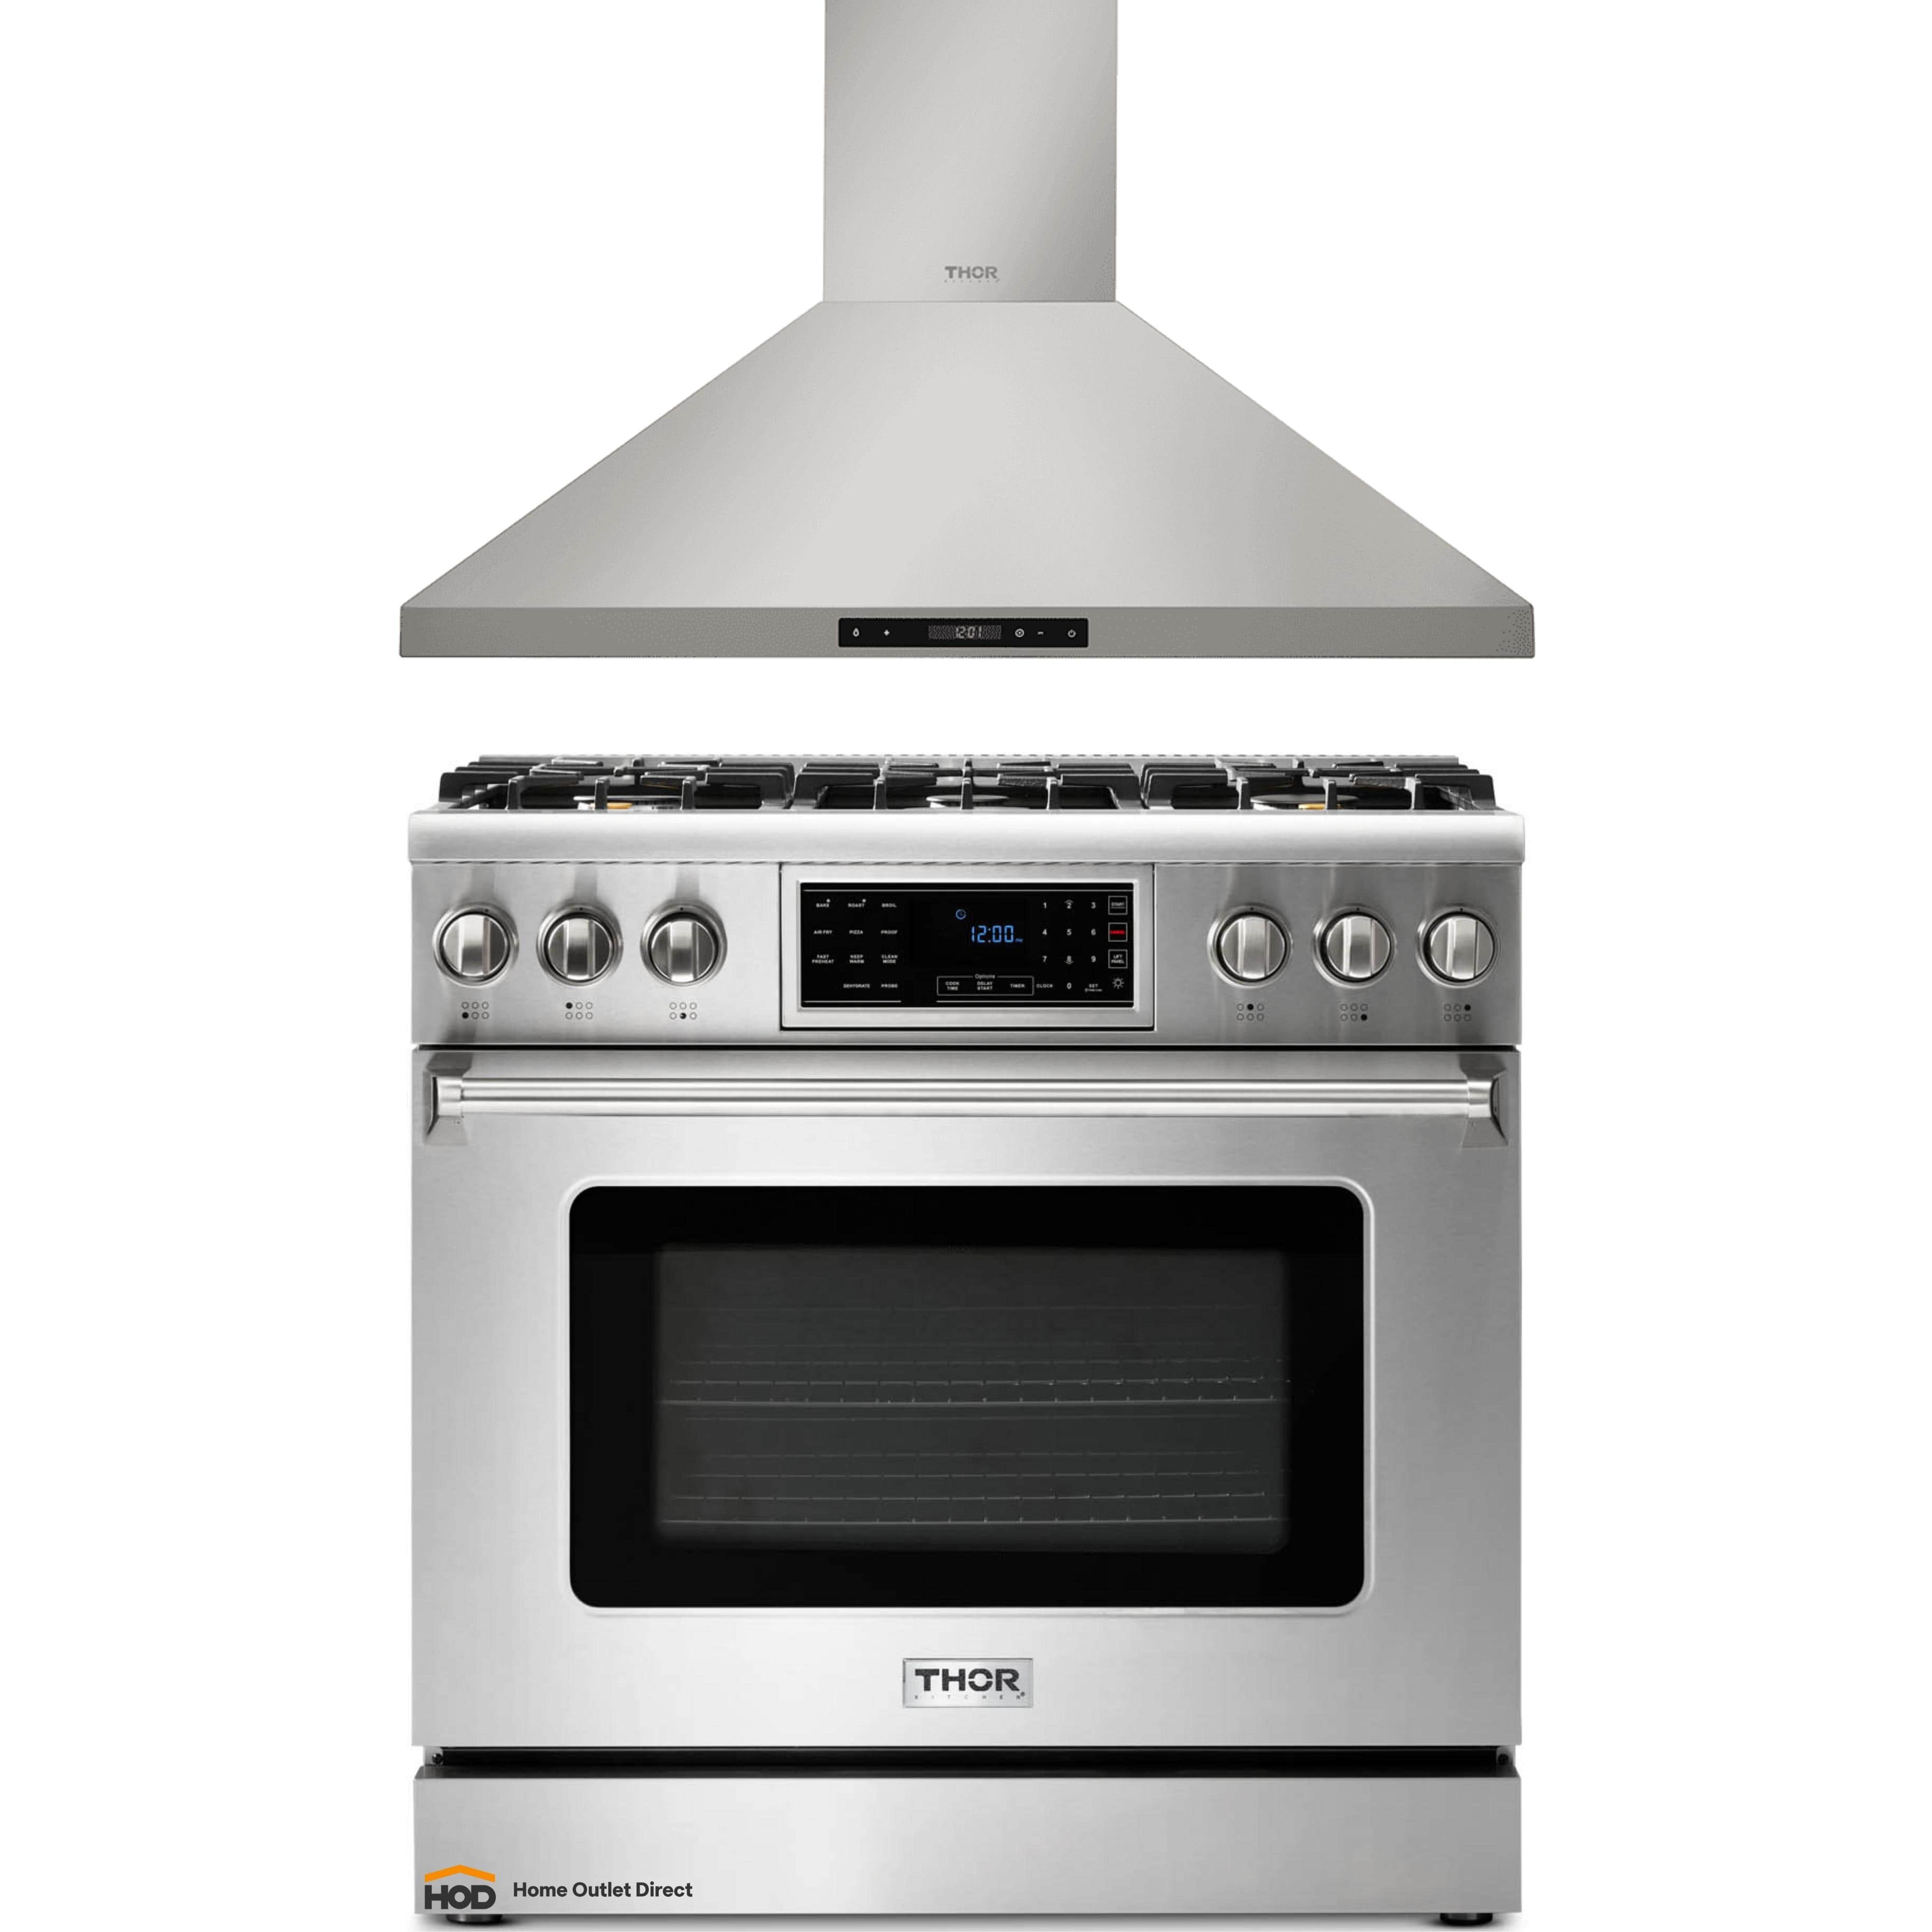 Thor Kitchen 2-Piece Appliance Package - 36-Inch Gas Range with Tilt Panel & Premium Wall Mount Hood in Stainless Steel